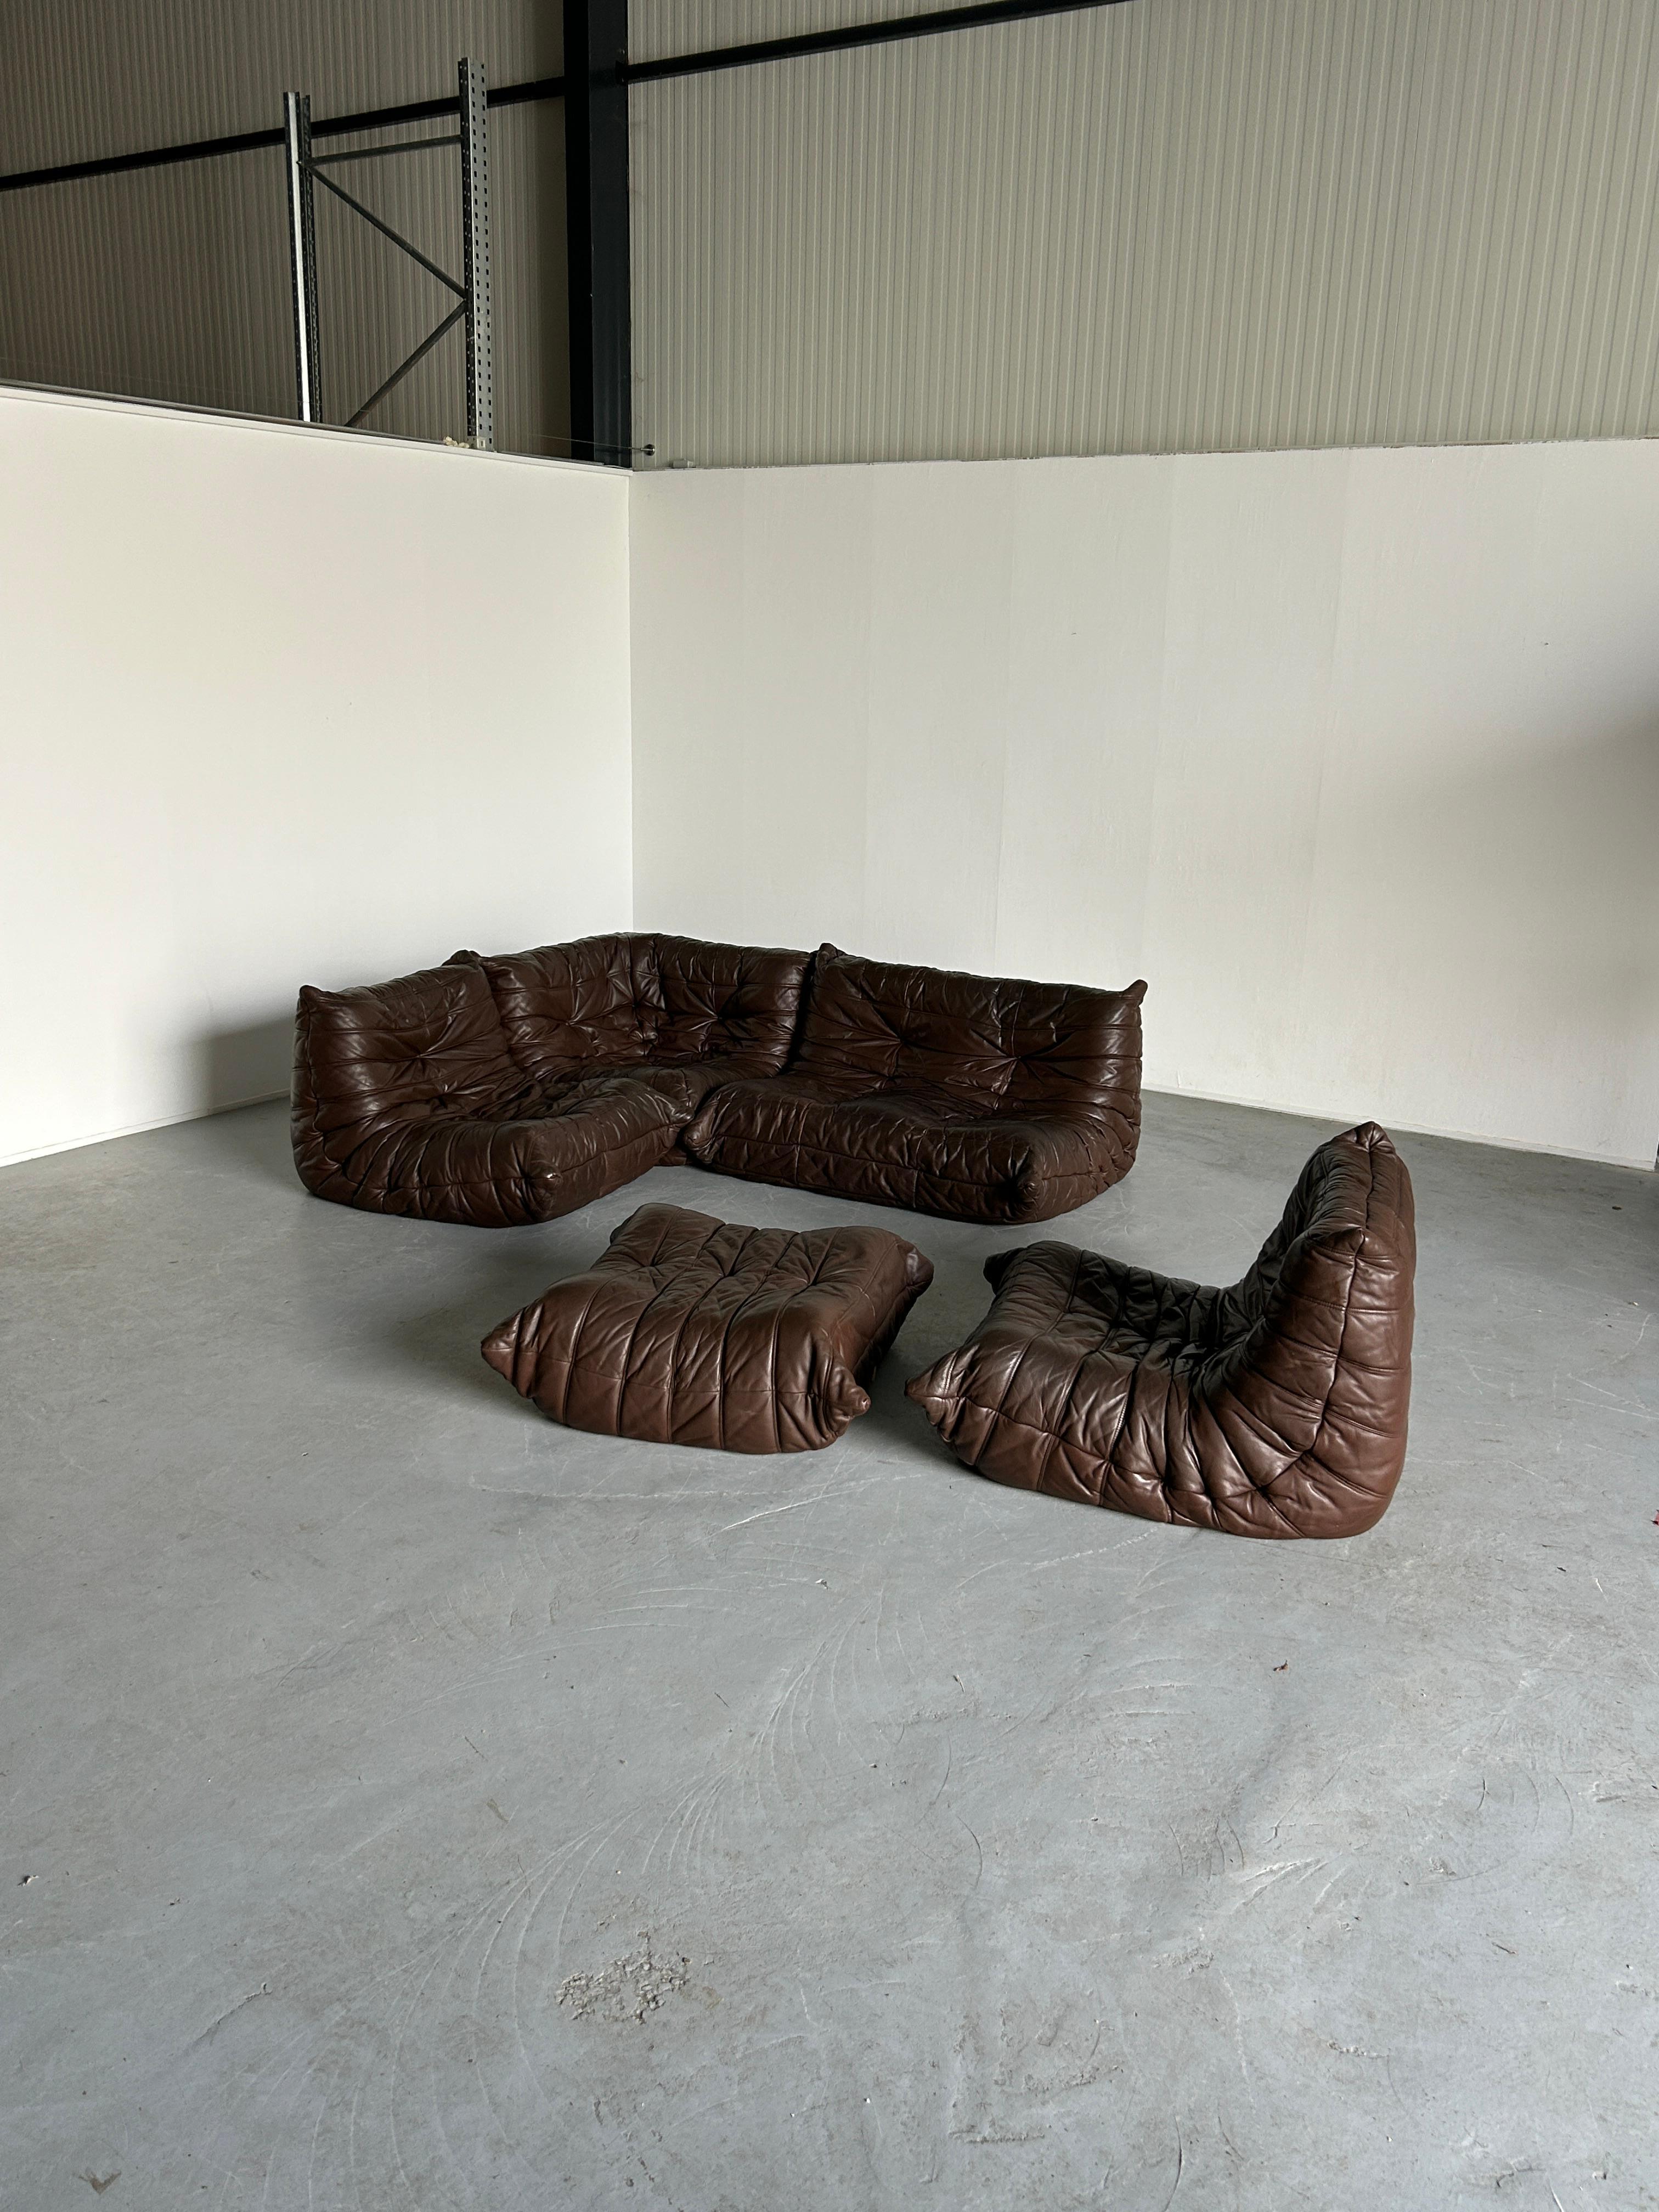 Beautiful original Ligne Roset 'Togo' lounge set in dark brown leather. Designed by Michel Ducaroy in the 1970s.
Rare and early production of the late 1970s or early 1980s.
Sourced from the original owners.

Price is for the complete set of five